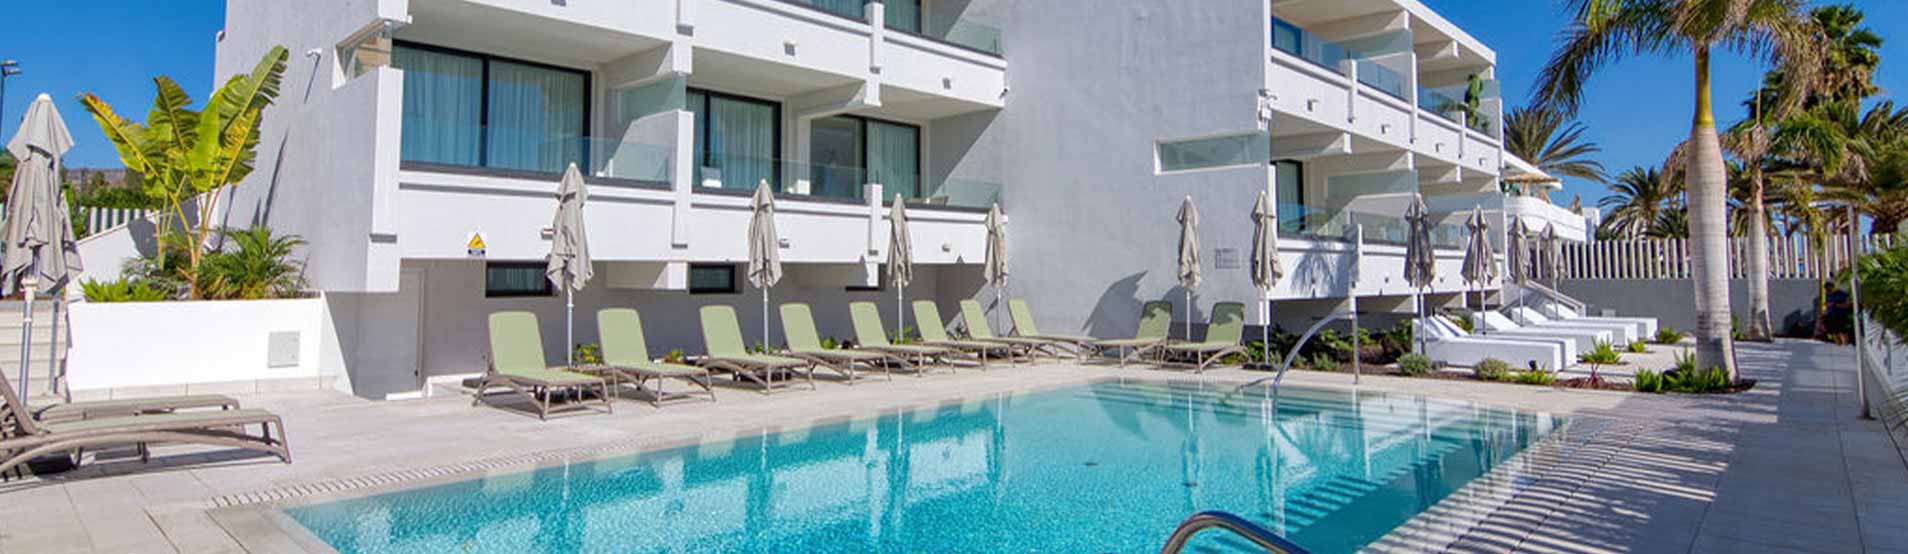 suites beverly park relaxia hotels relaxia hotels